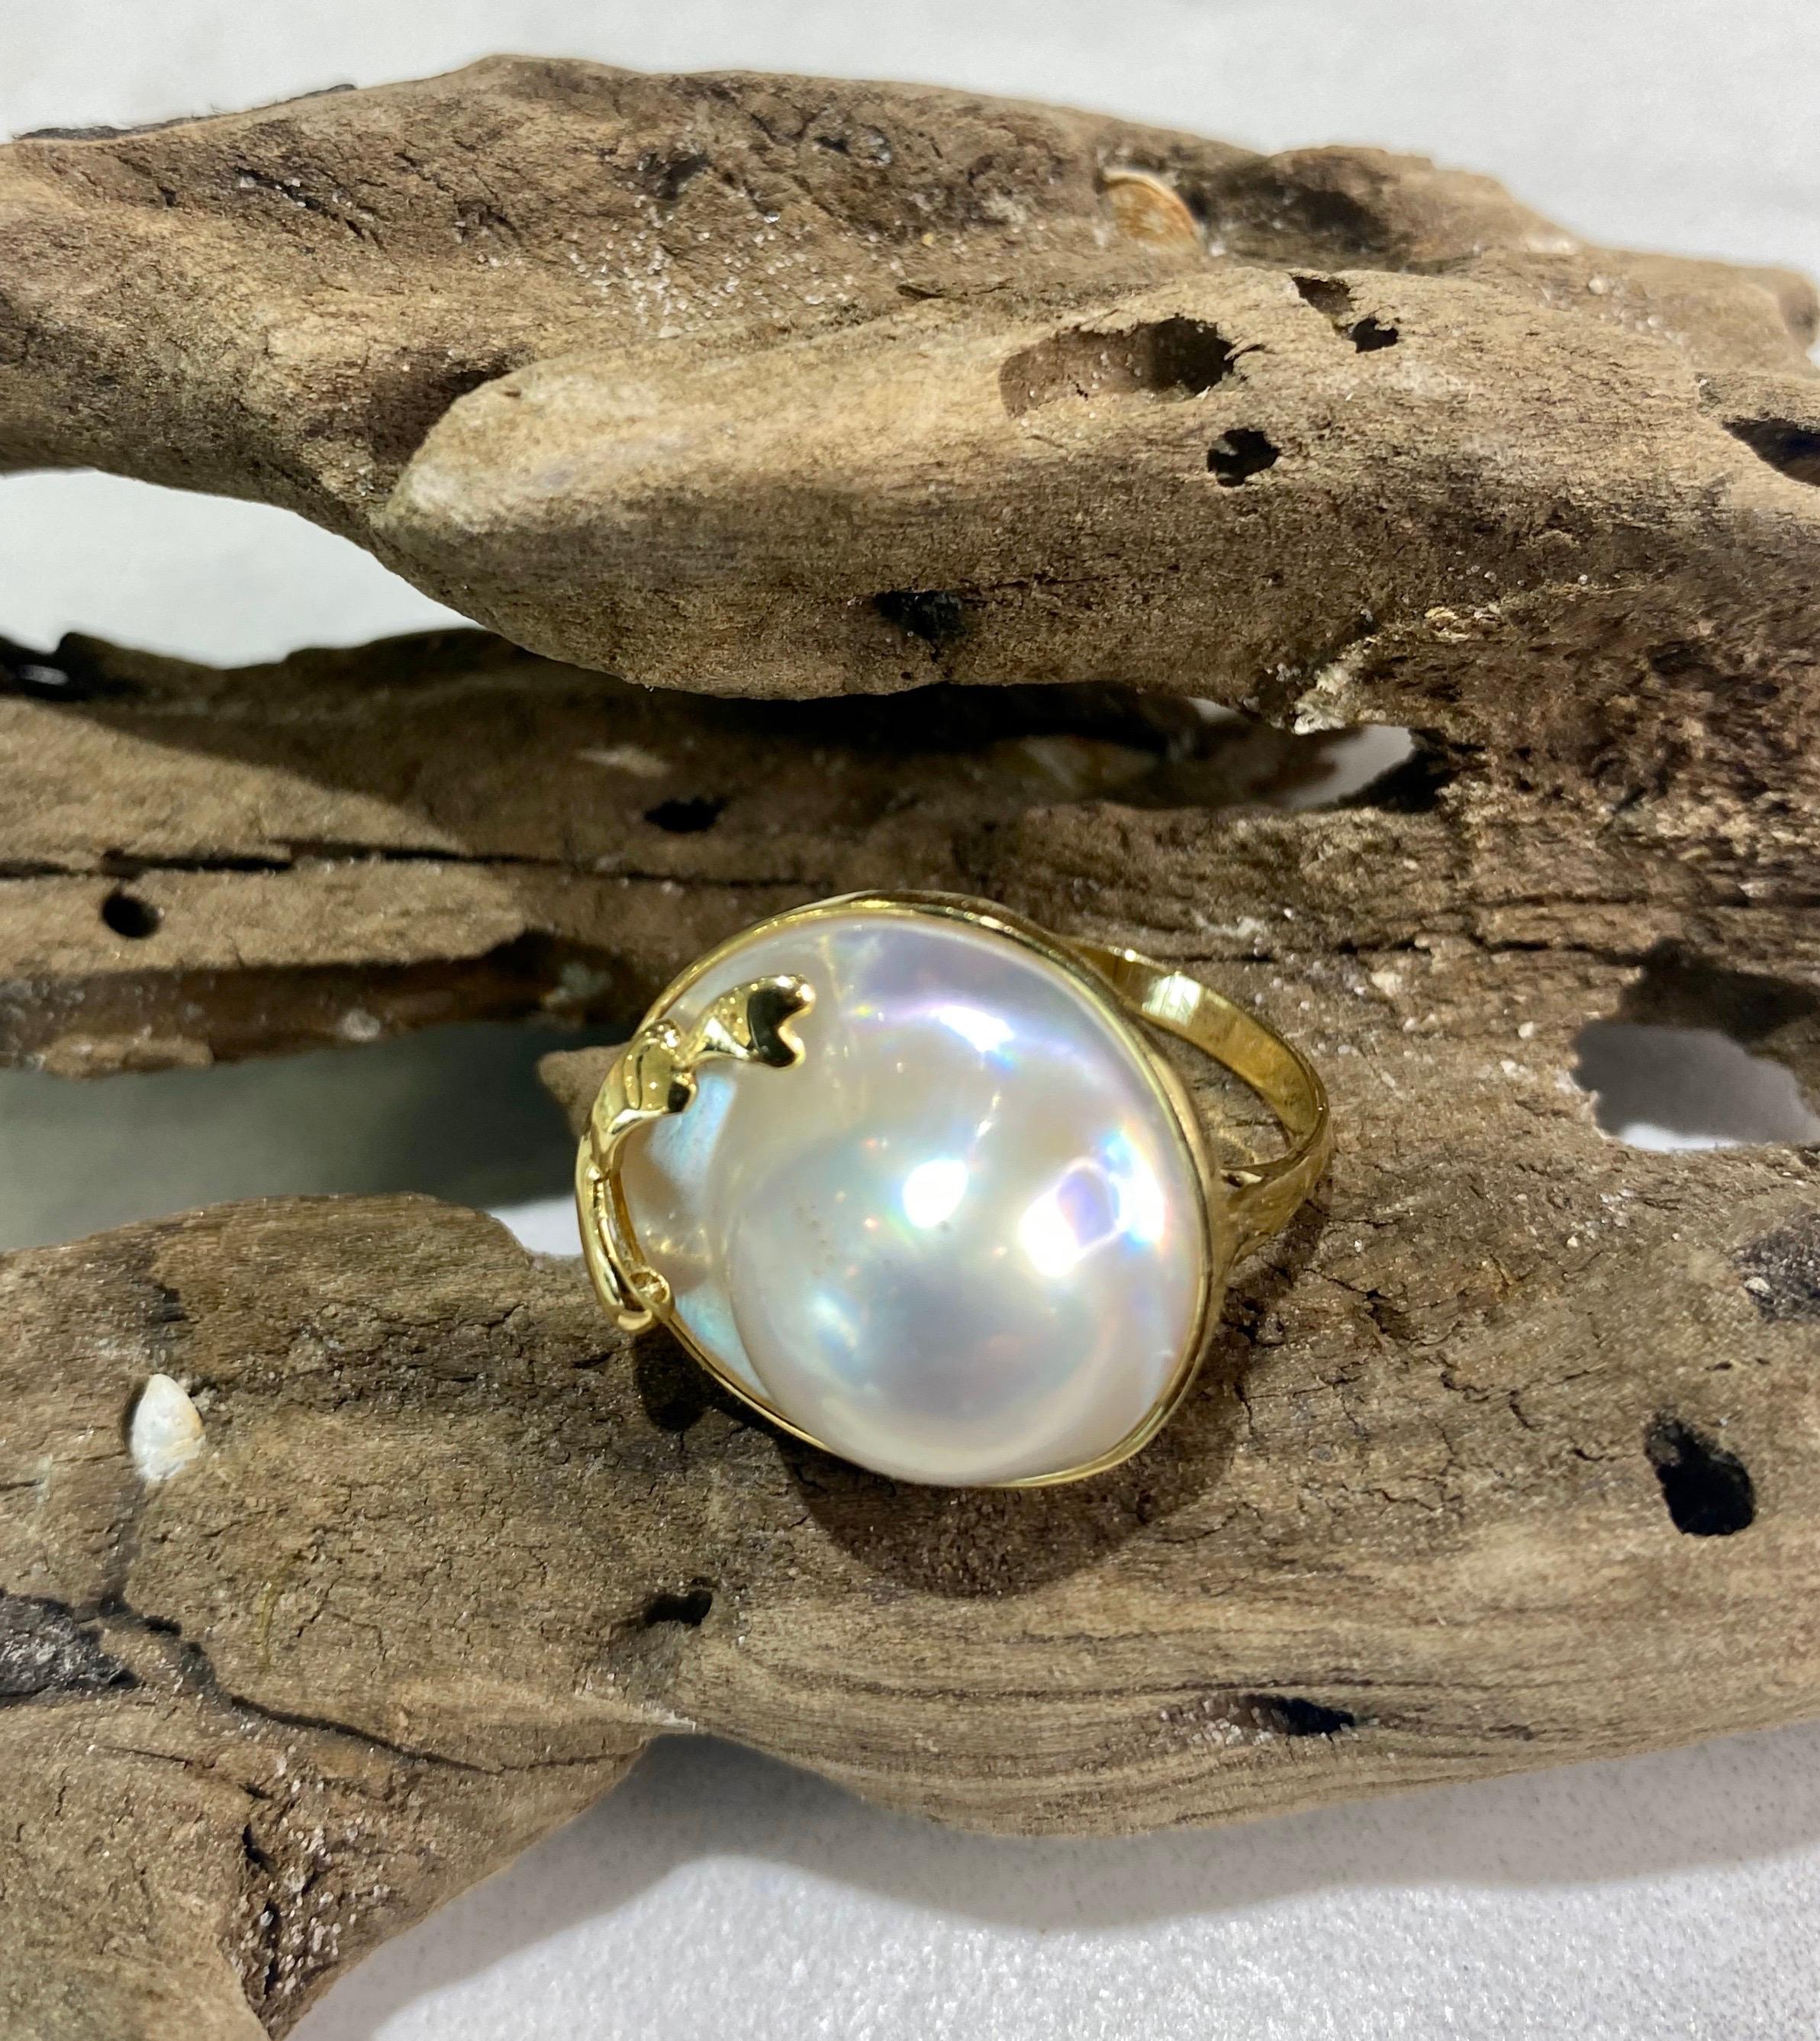 This stunning ring is made with a large 16mm South Sea mabe pearl with a mirror-like luster, set in 14k gold.  The setting was handcrafted to showcase the beauty of the pearl.  The ring is size 7 and can easily be resized if needed.